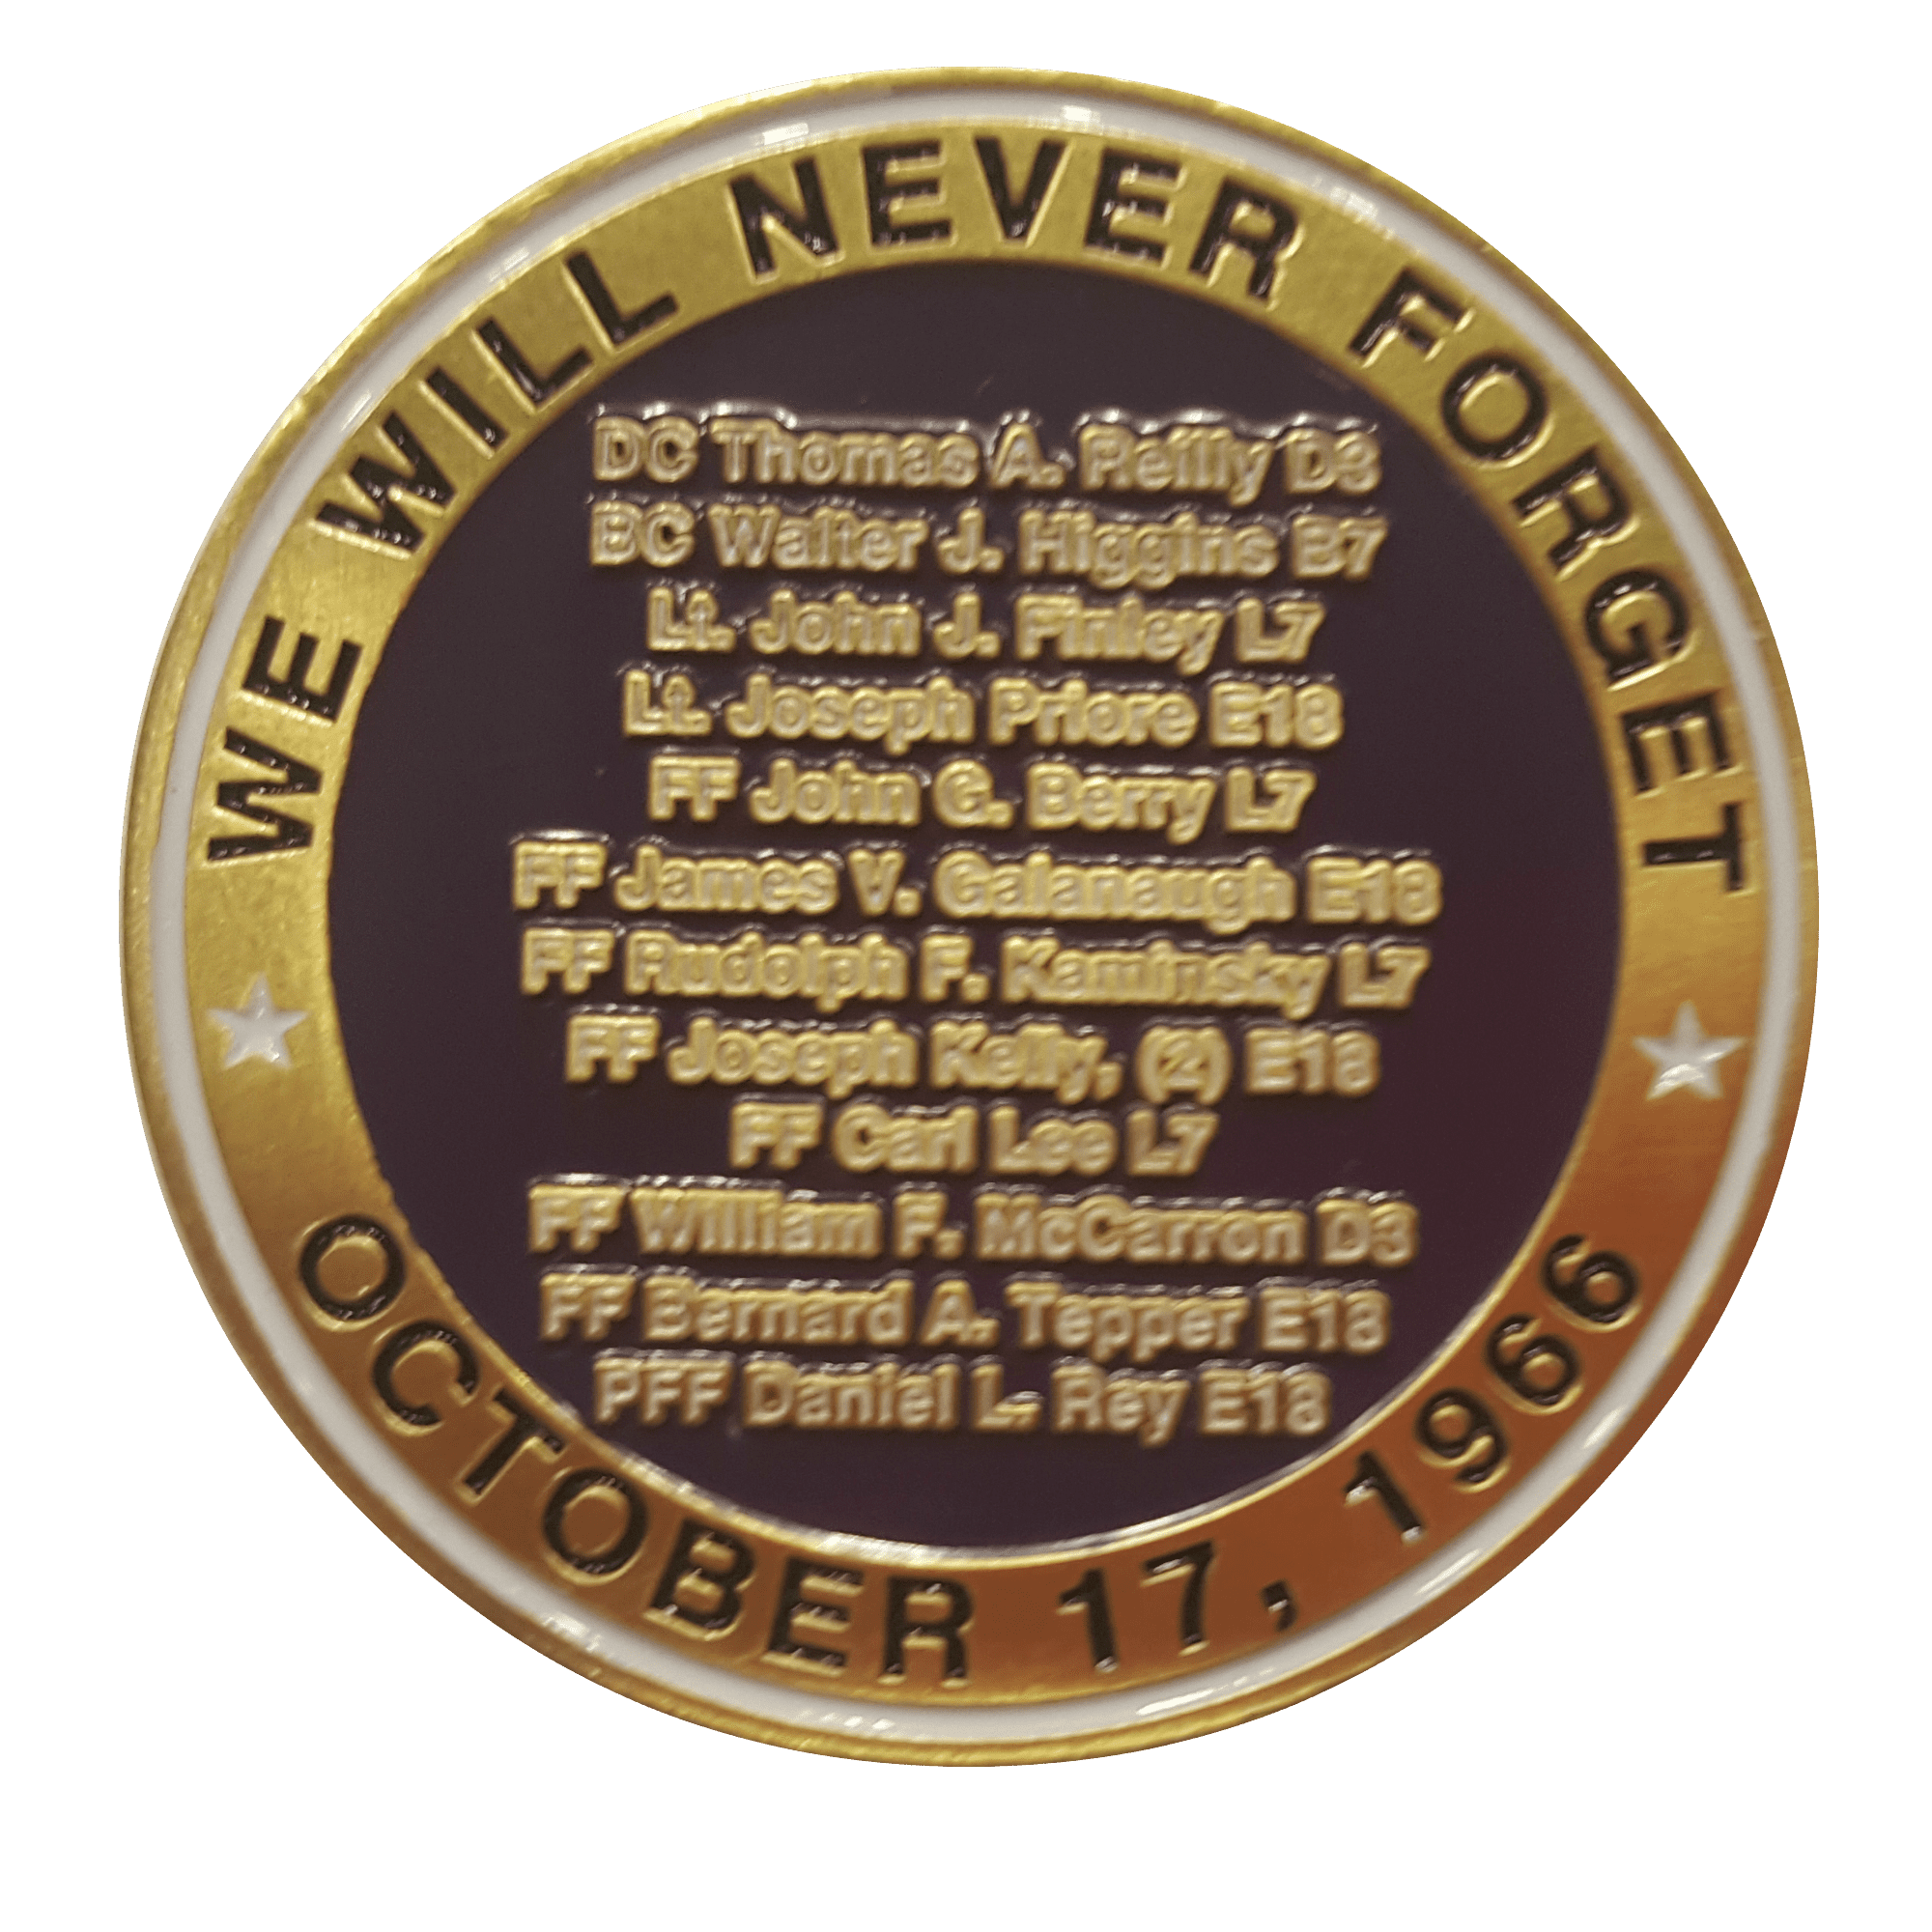 FDNY 23RD STREET FIRE 50TH YEAR COMMEMORATIVE COIN - FDNY Shop